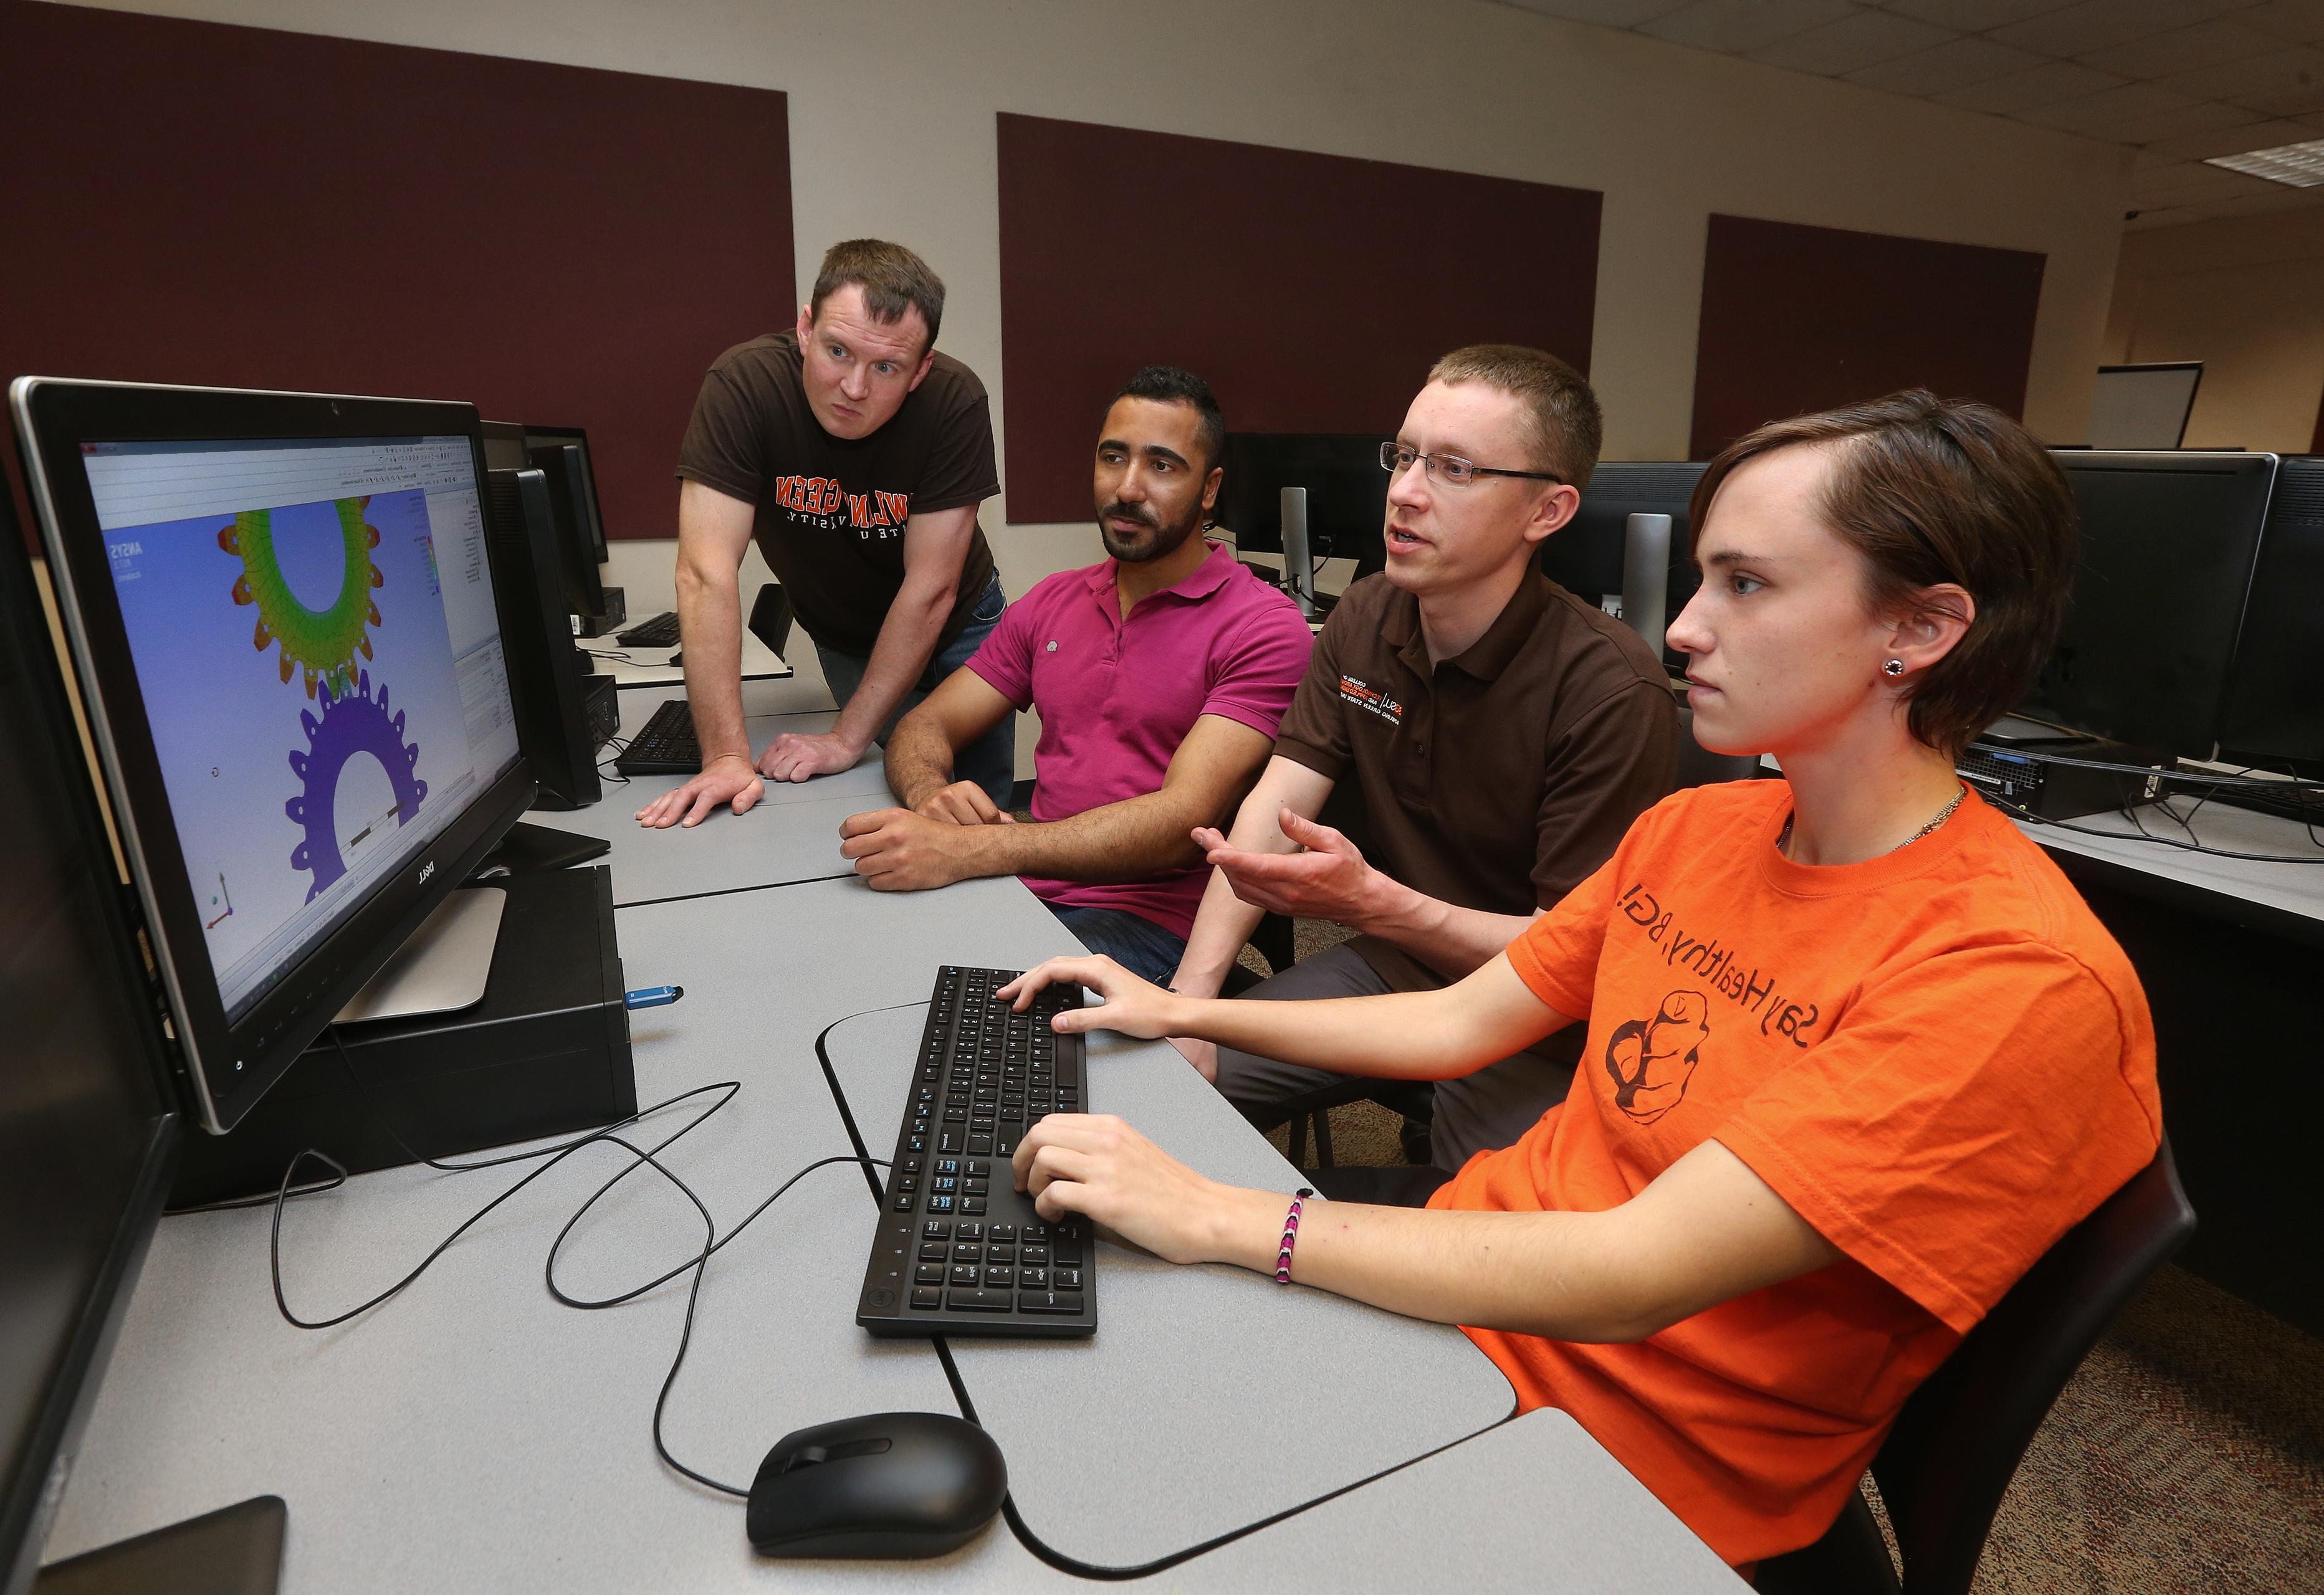 Three male 和 one female in the master’s program in the BGSU technology management program with a focus in quality systems work together in front of a computer.